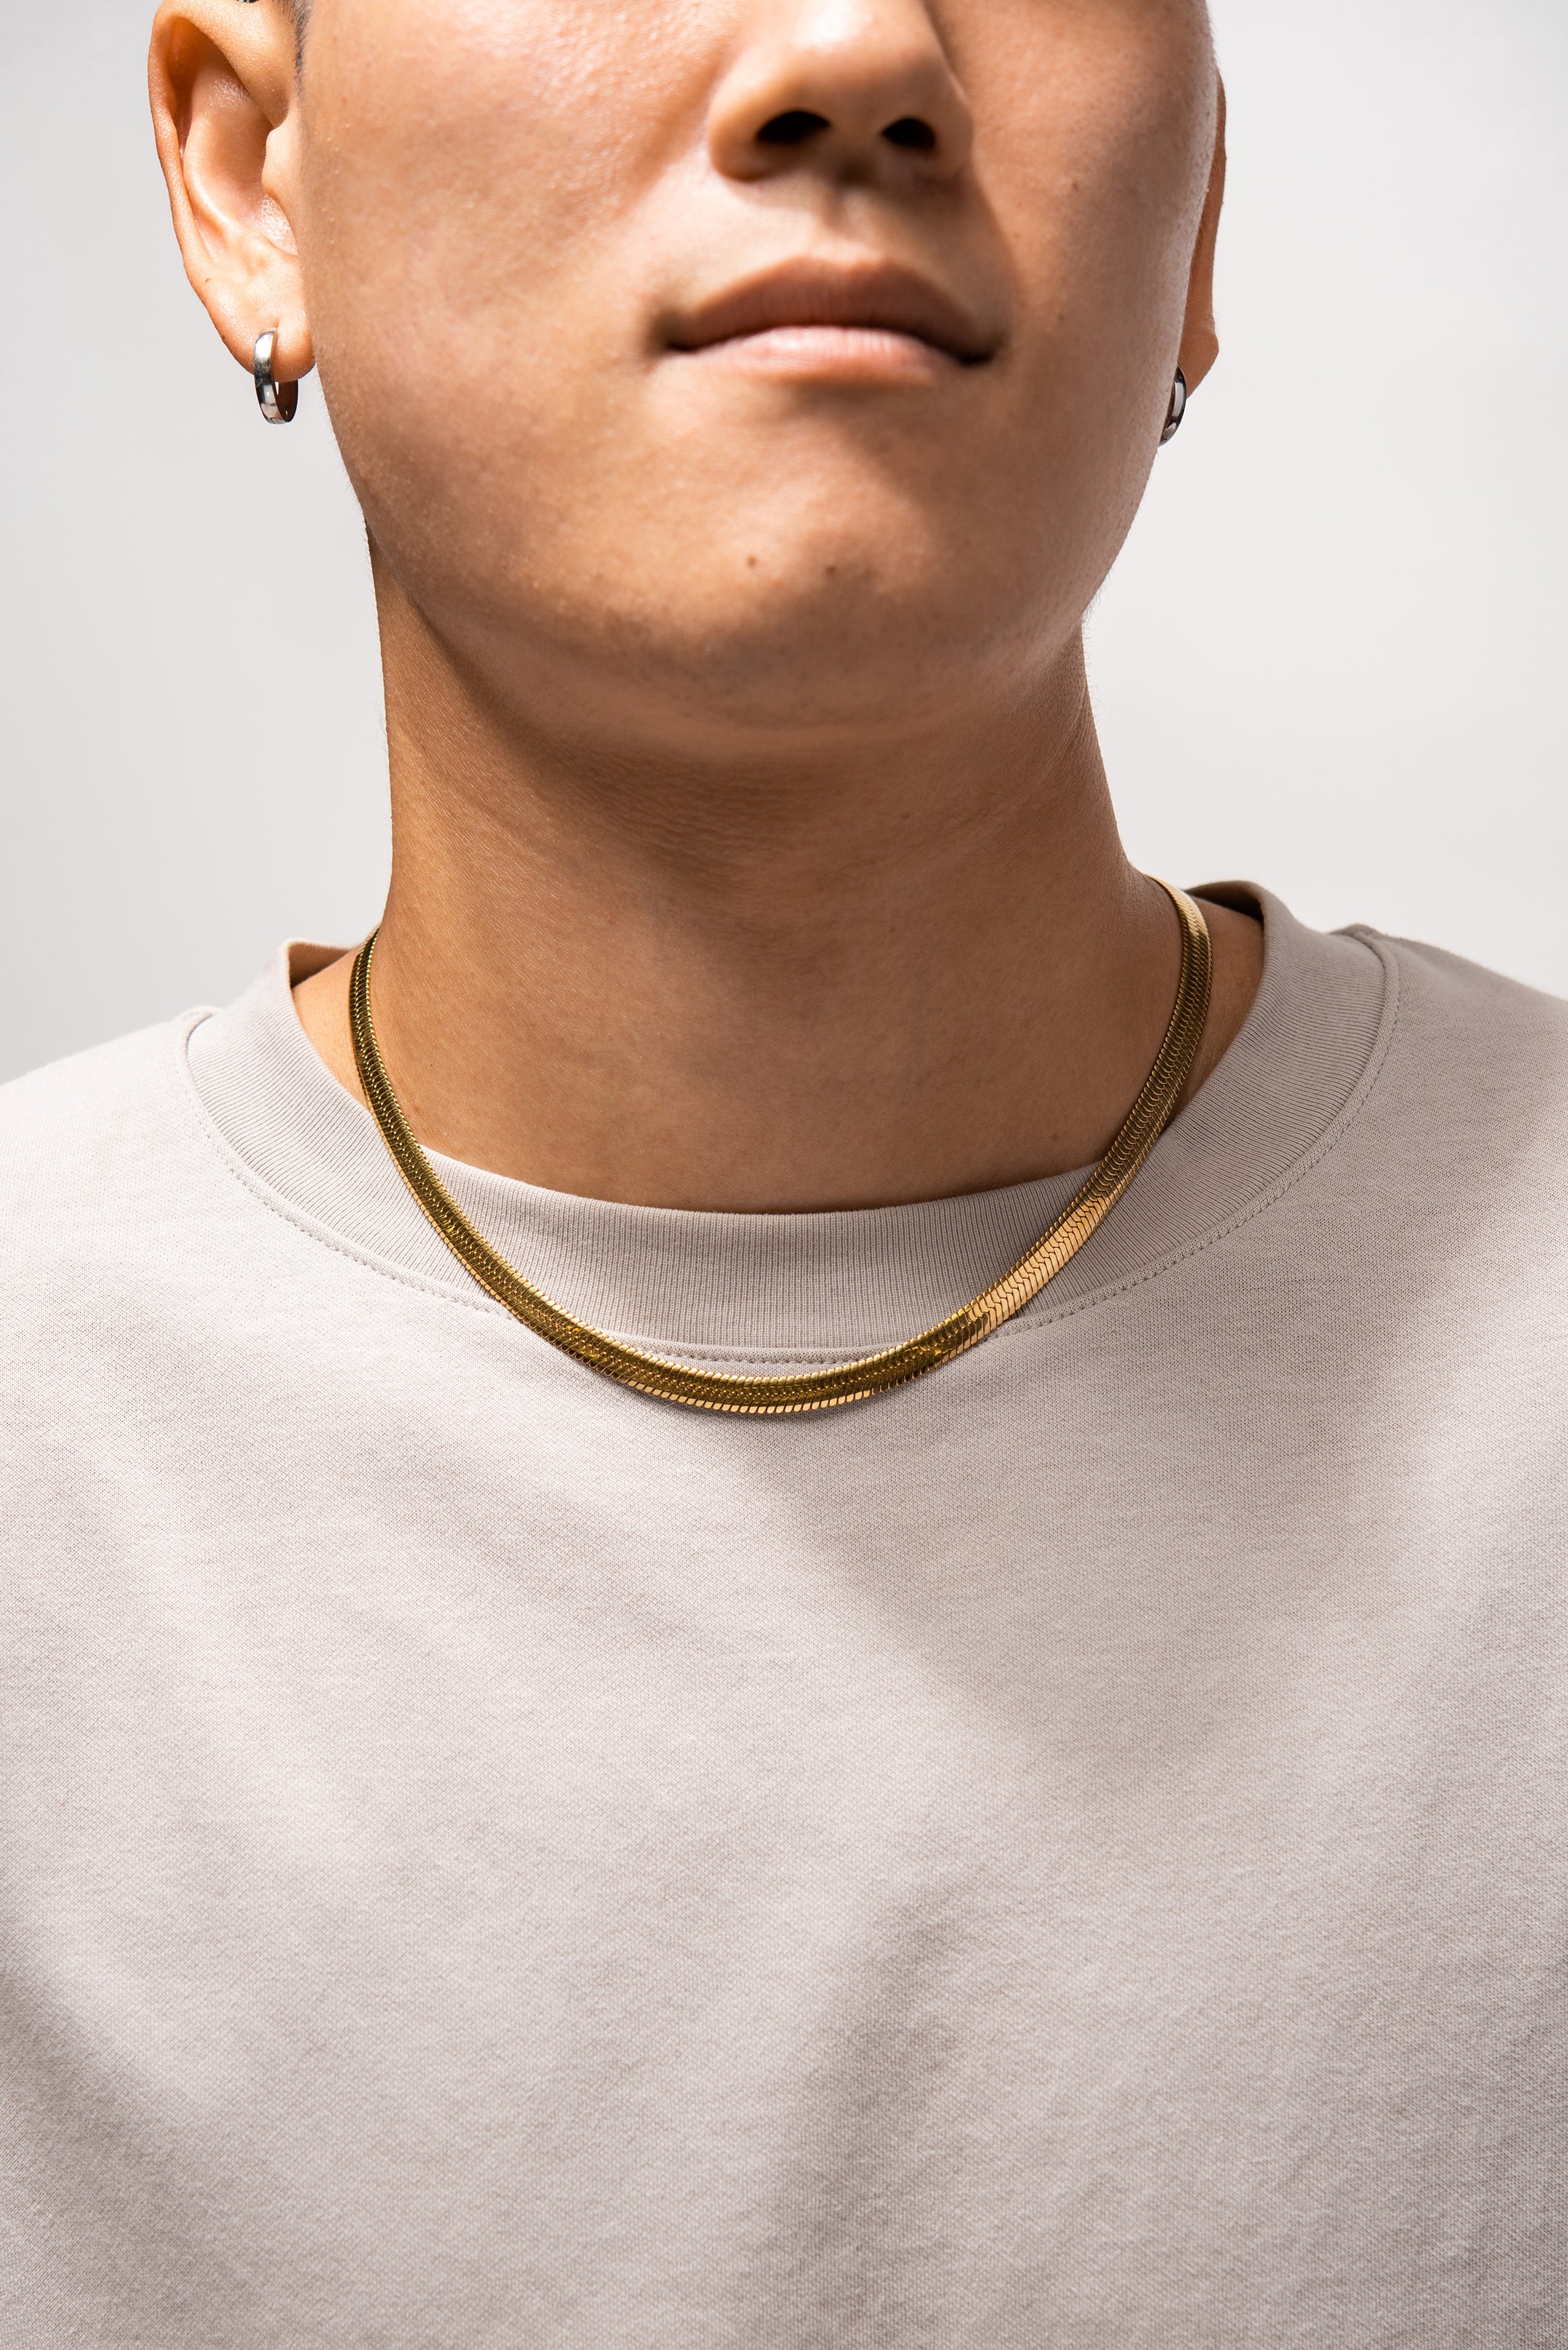 8mm Silver Herringbone Chain Necklace | Classy Men Collection